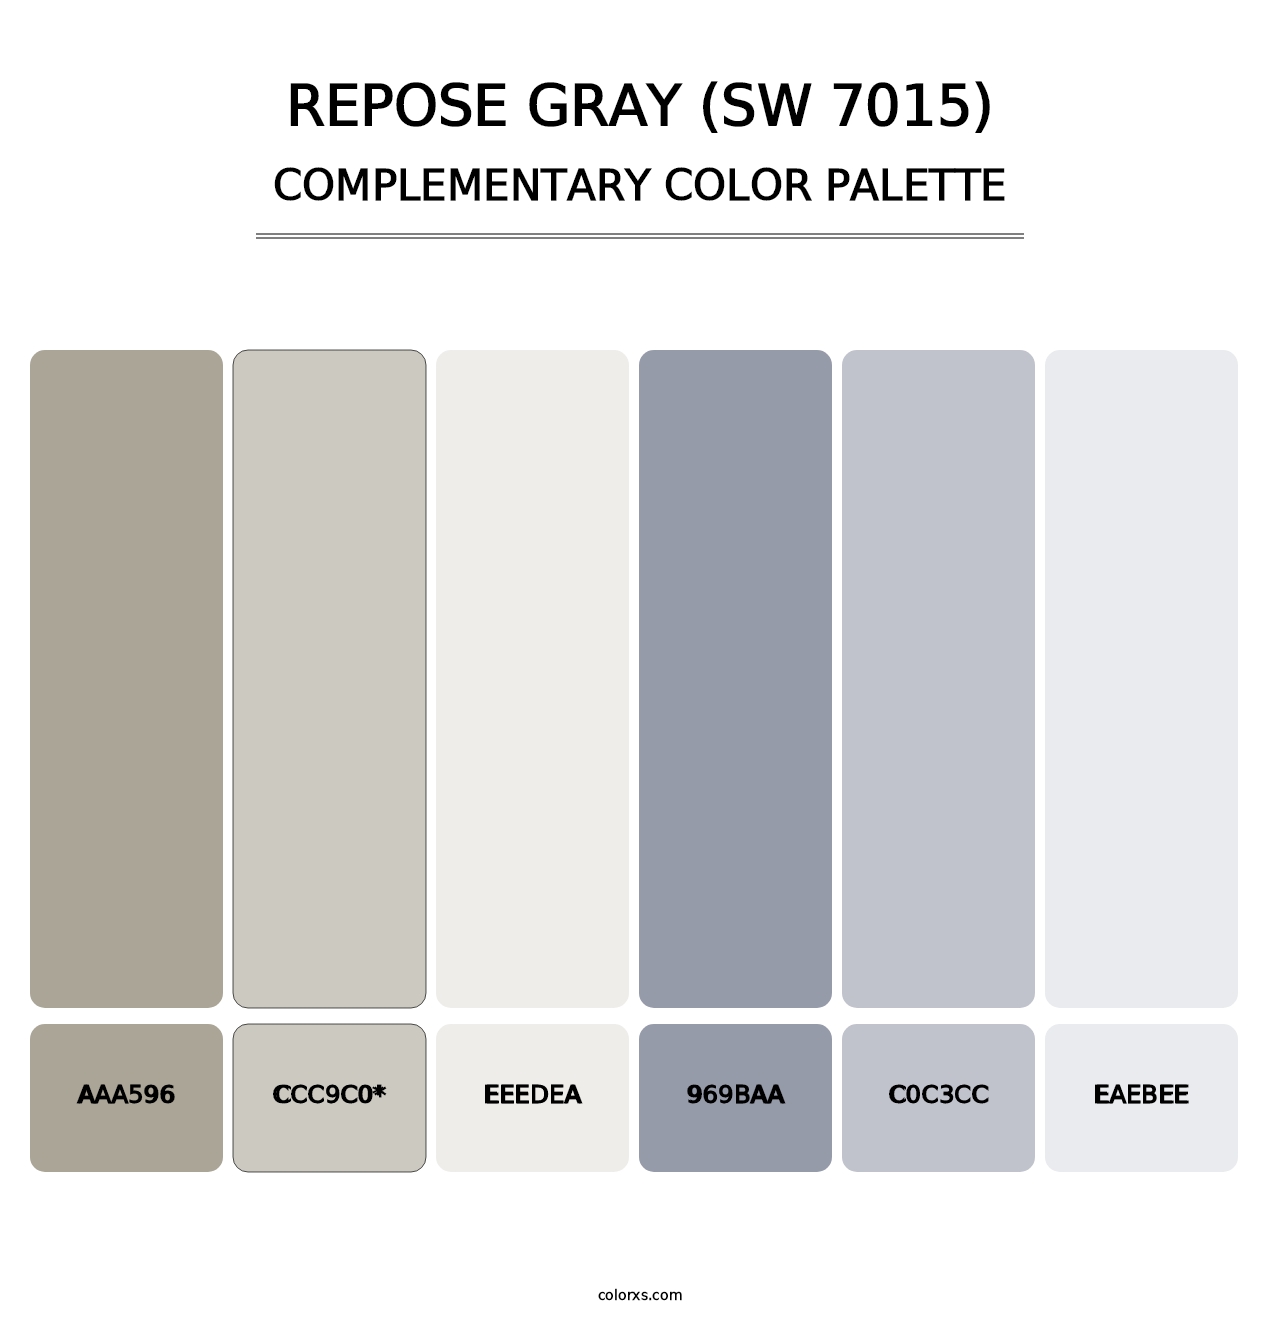 Repose Gray (SW 7015) - Complementary Color Palette